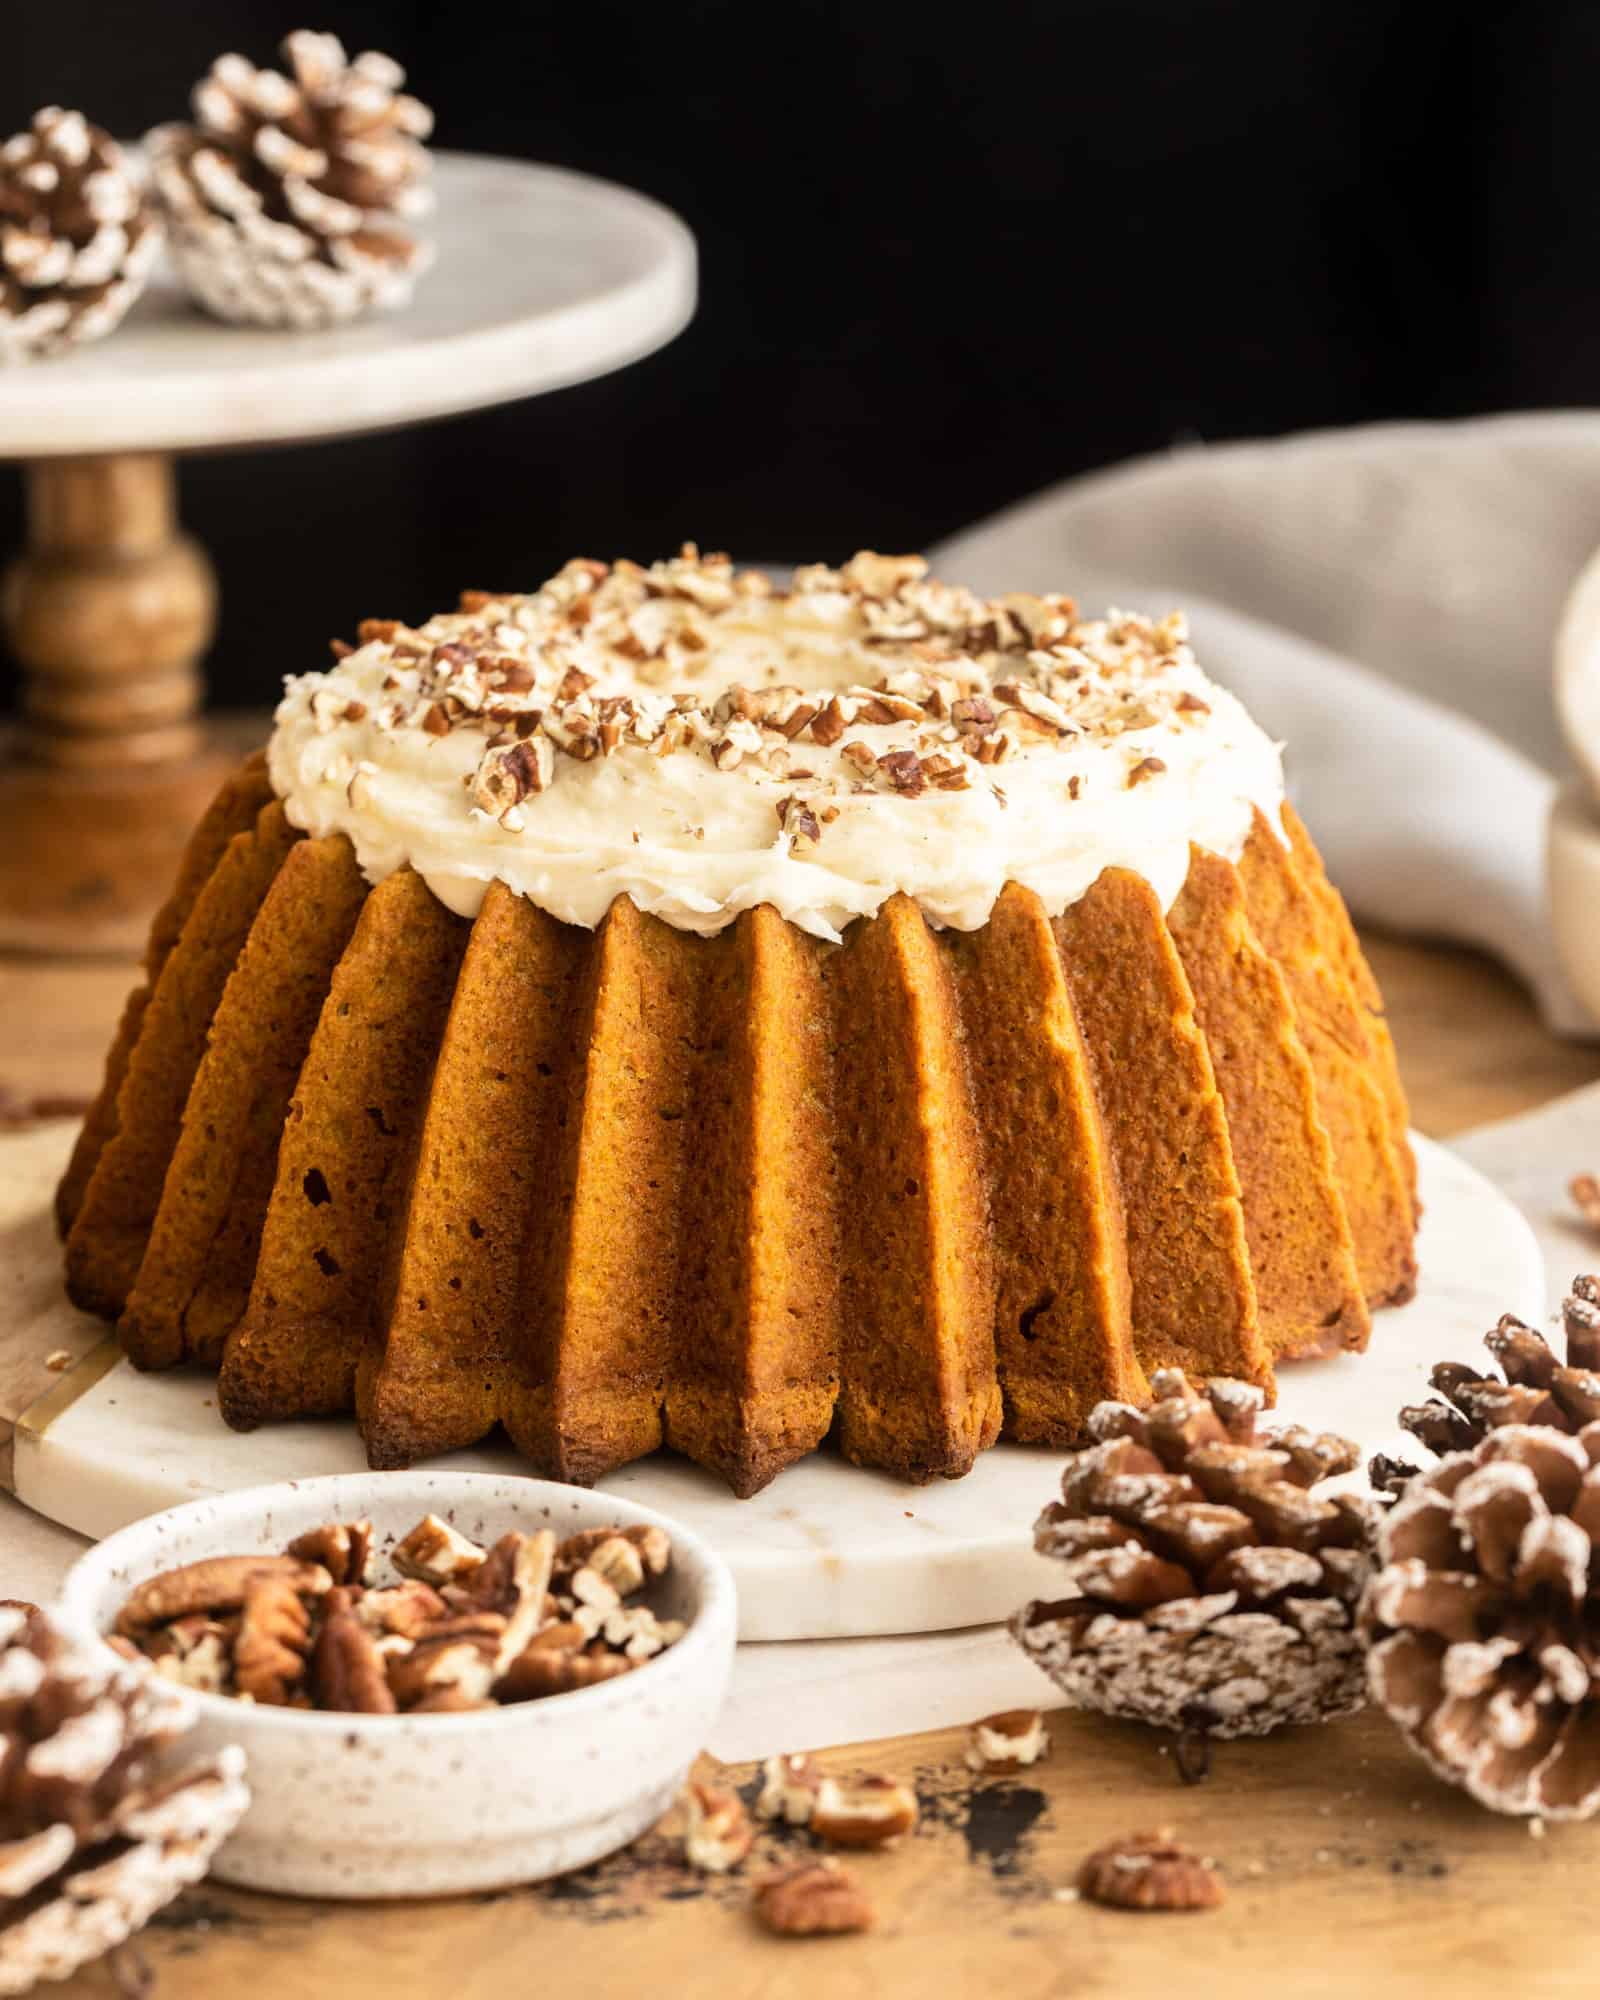 Sweet Potato Pound Cake with Cream Cheese Frosting on a platter surrounded by a small bowl of walnuts and frosted acorns.